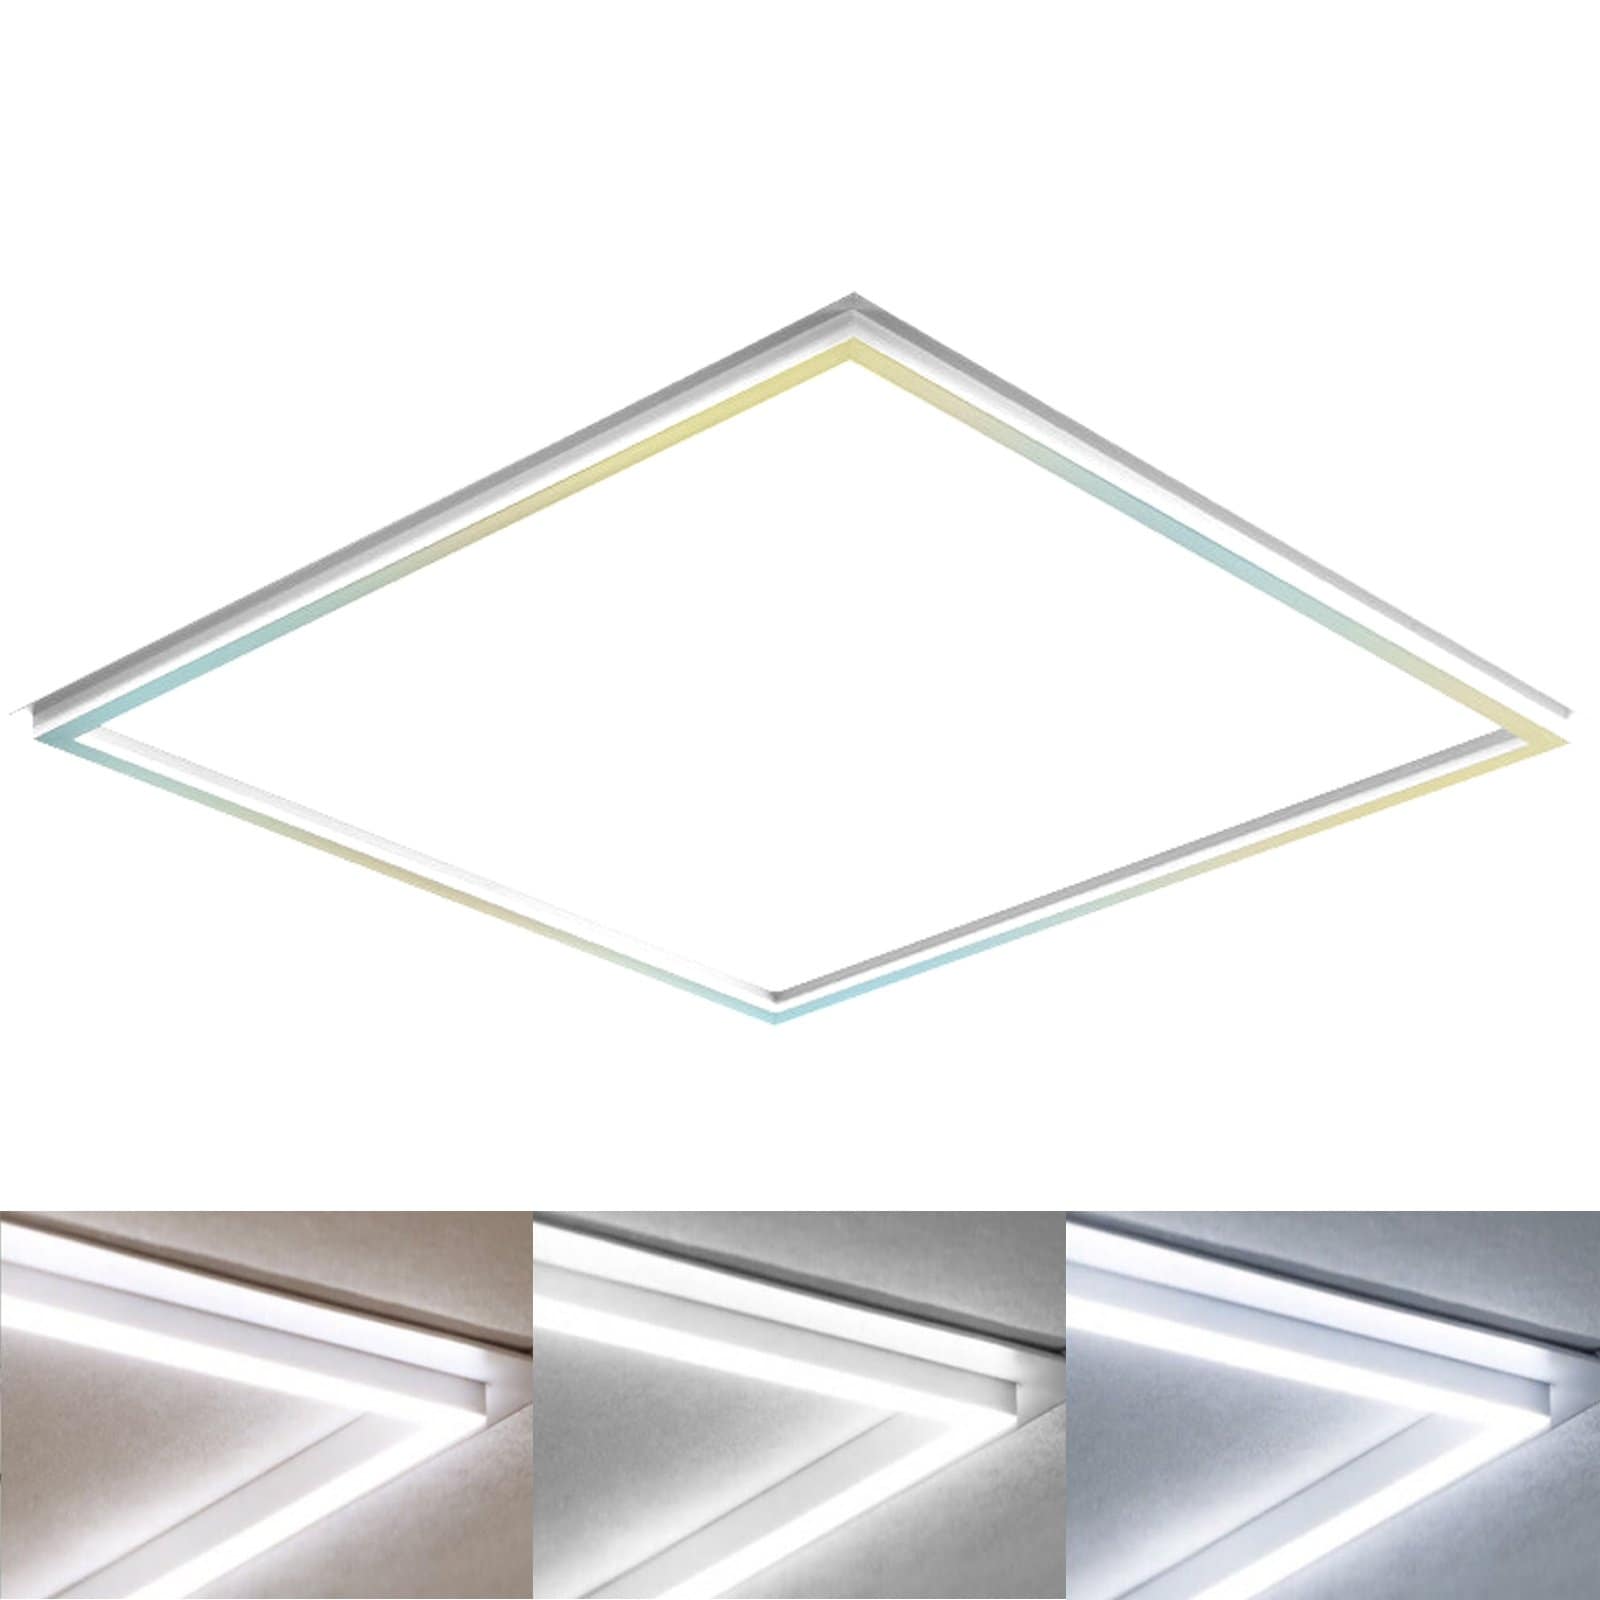 Luxrite 2x2 Panel Lights 3 Color Options 20W/30W/40W Switch Grid Drop Ceiling Lights Dimmable 120-277V - On Sale - Bed Bath & - 34128146